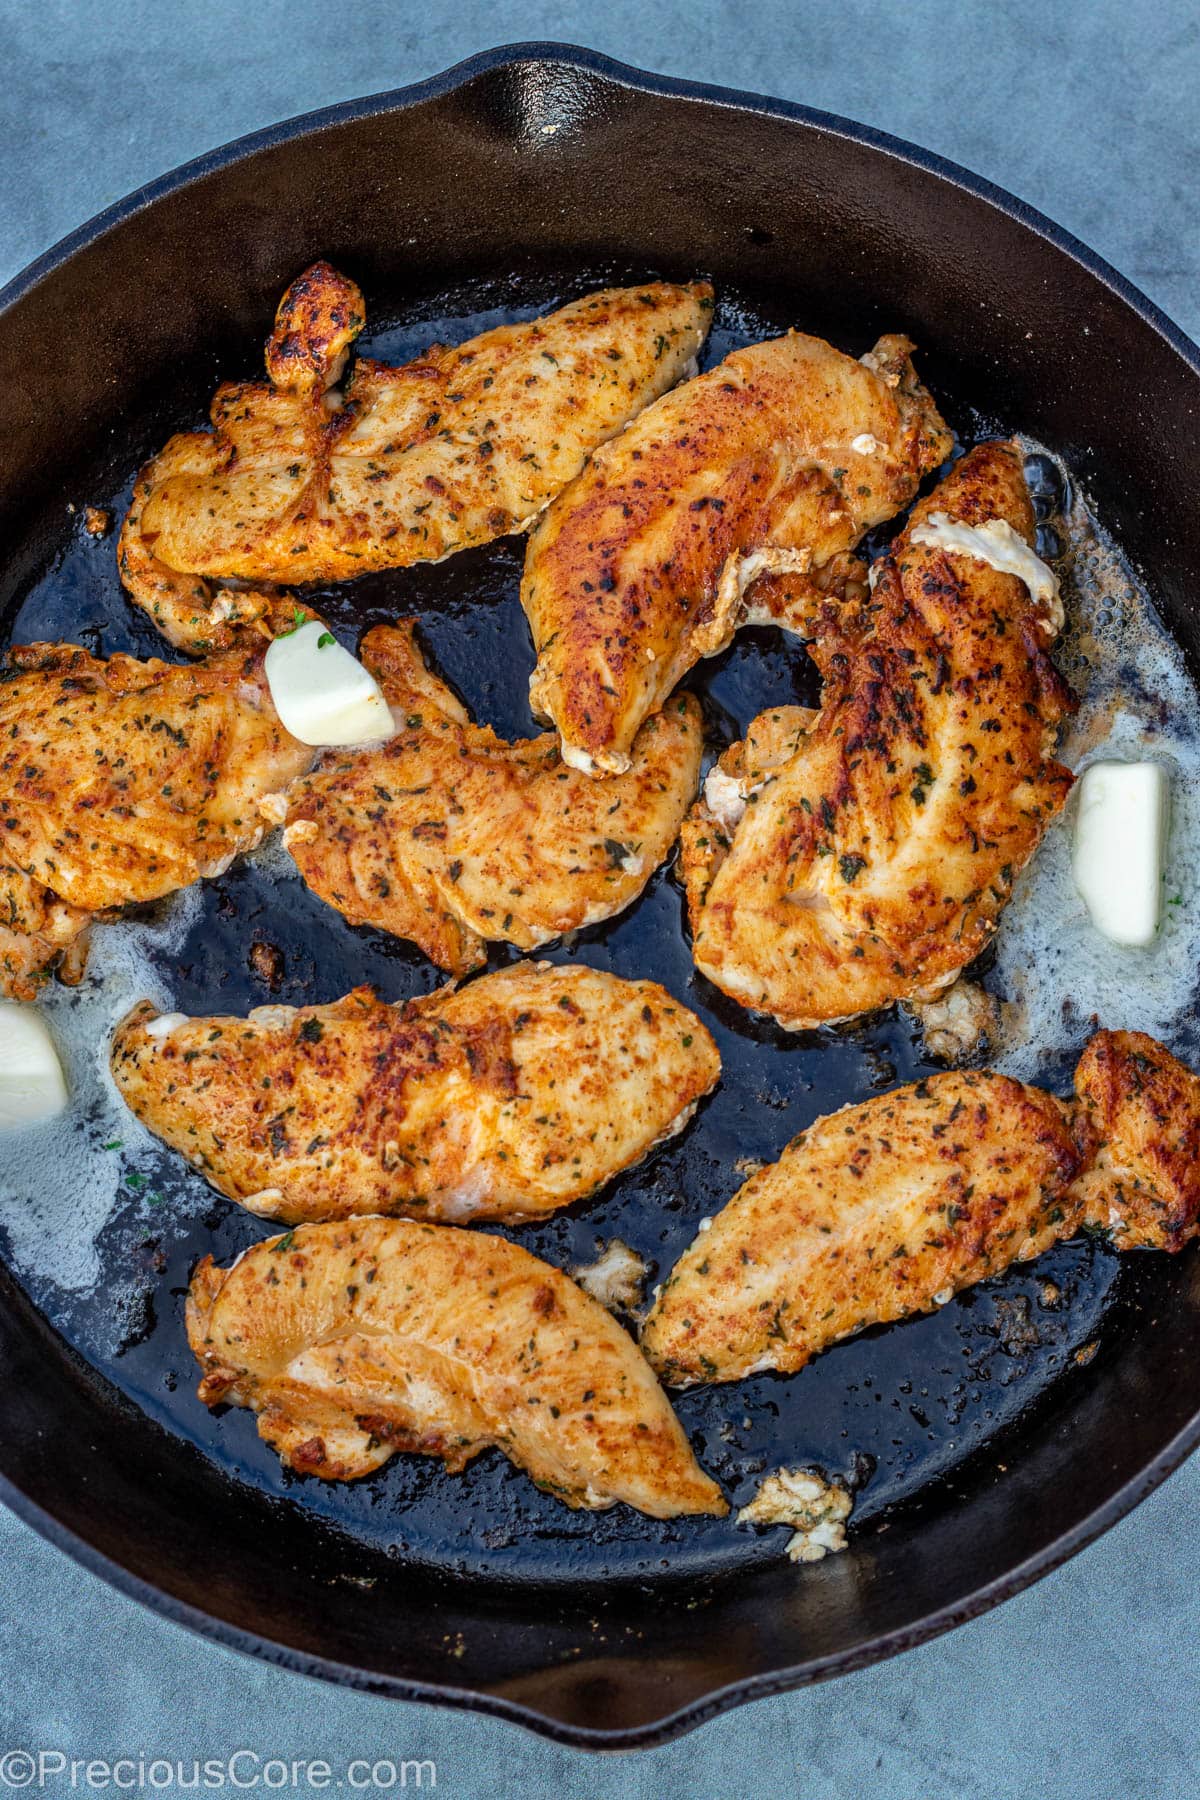 Butter in pan with chicken.